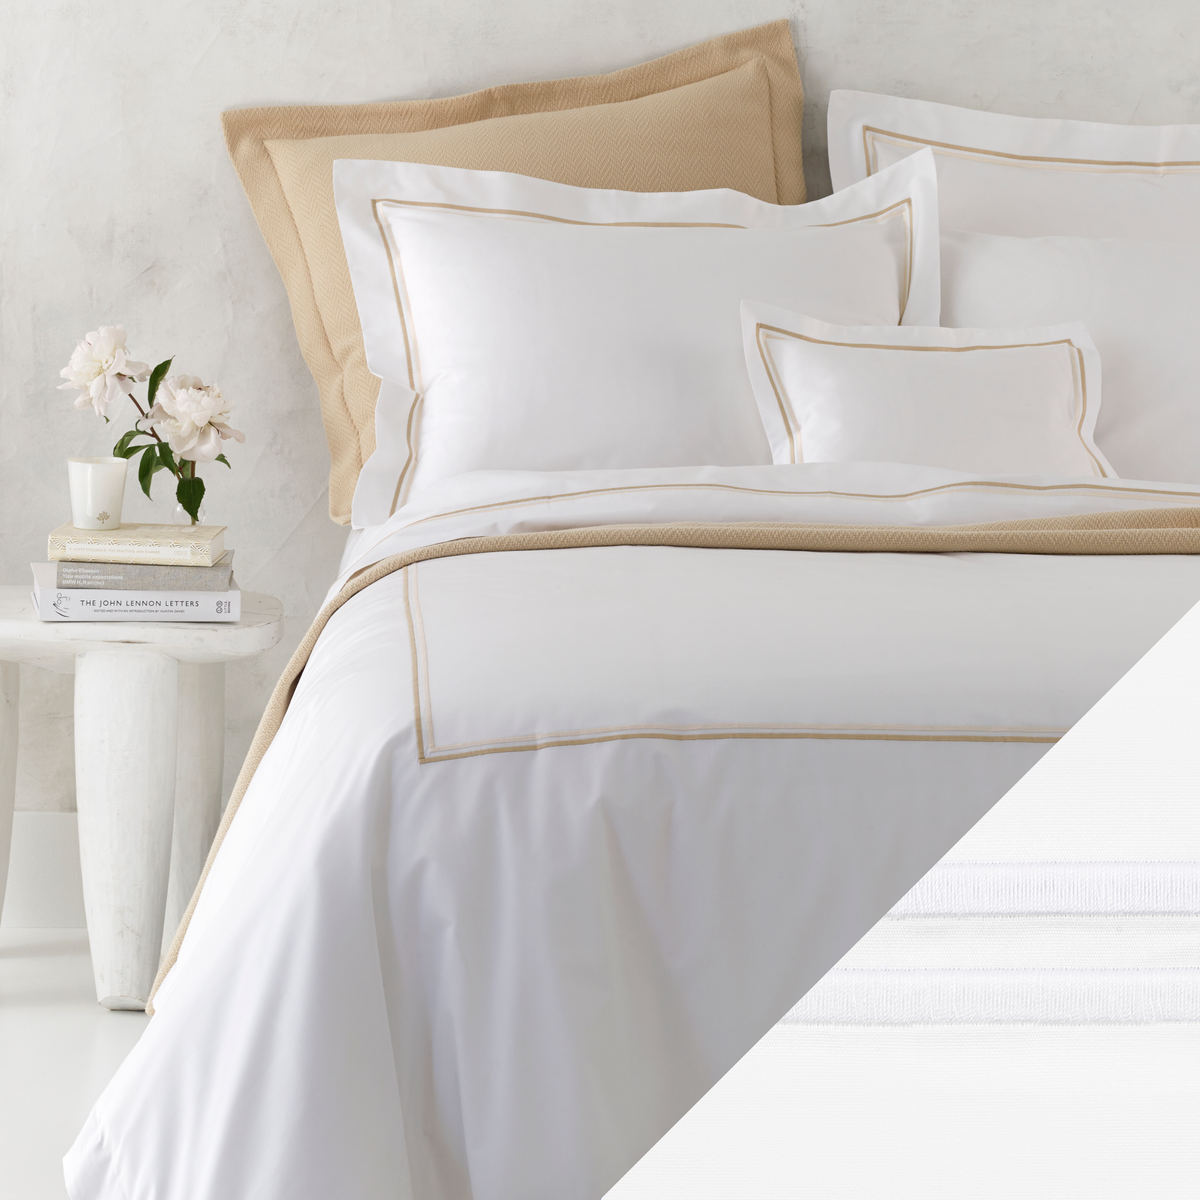 Corner Picture of Matouk Essex High End Bedding with Swatch in White Color